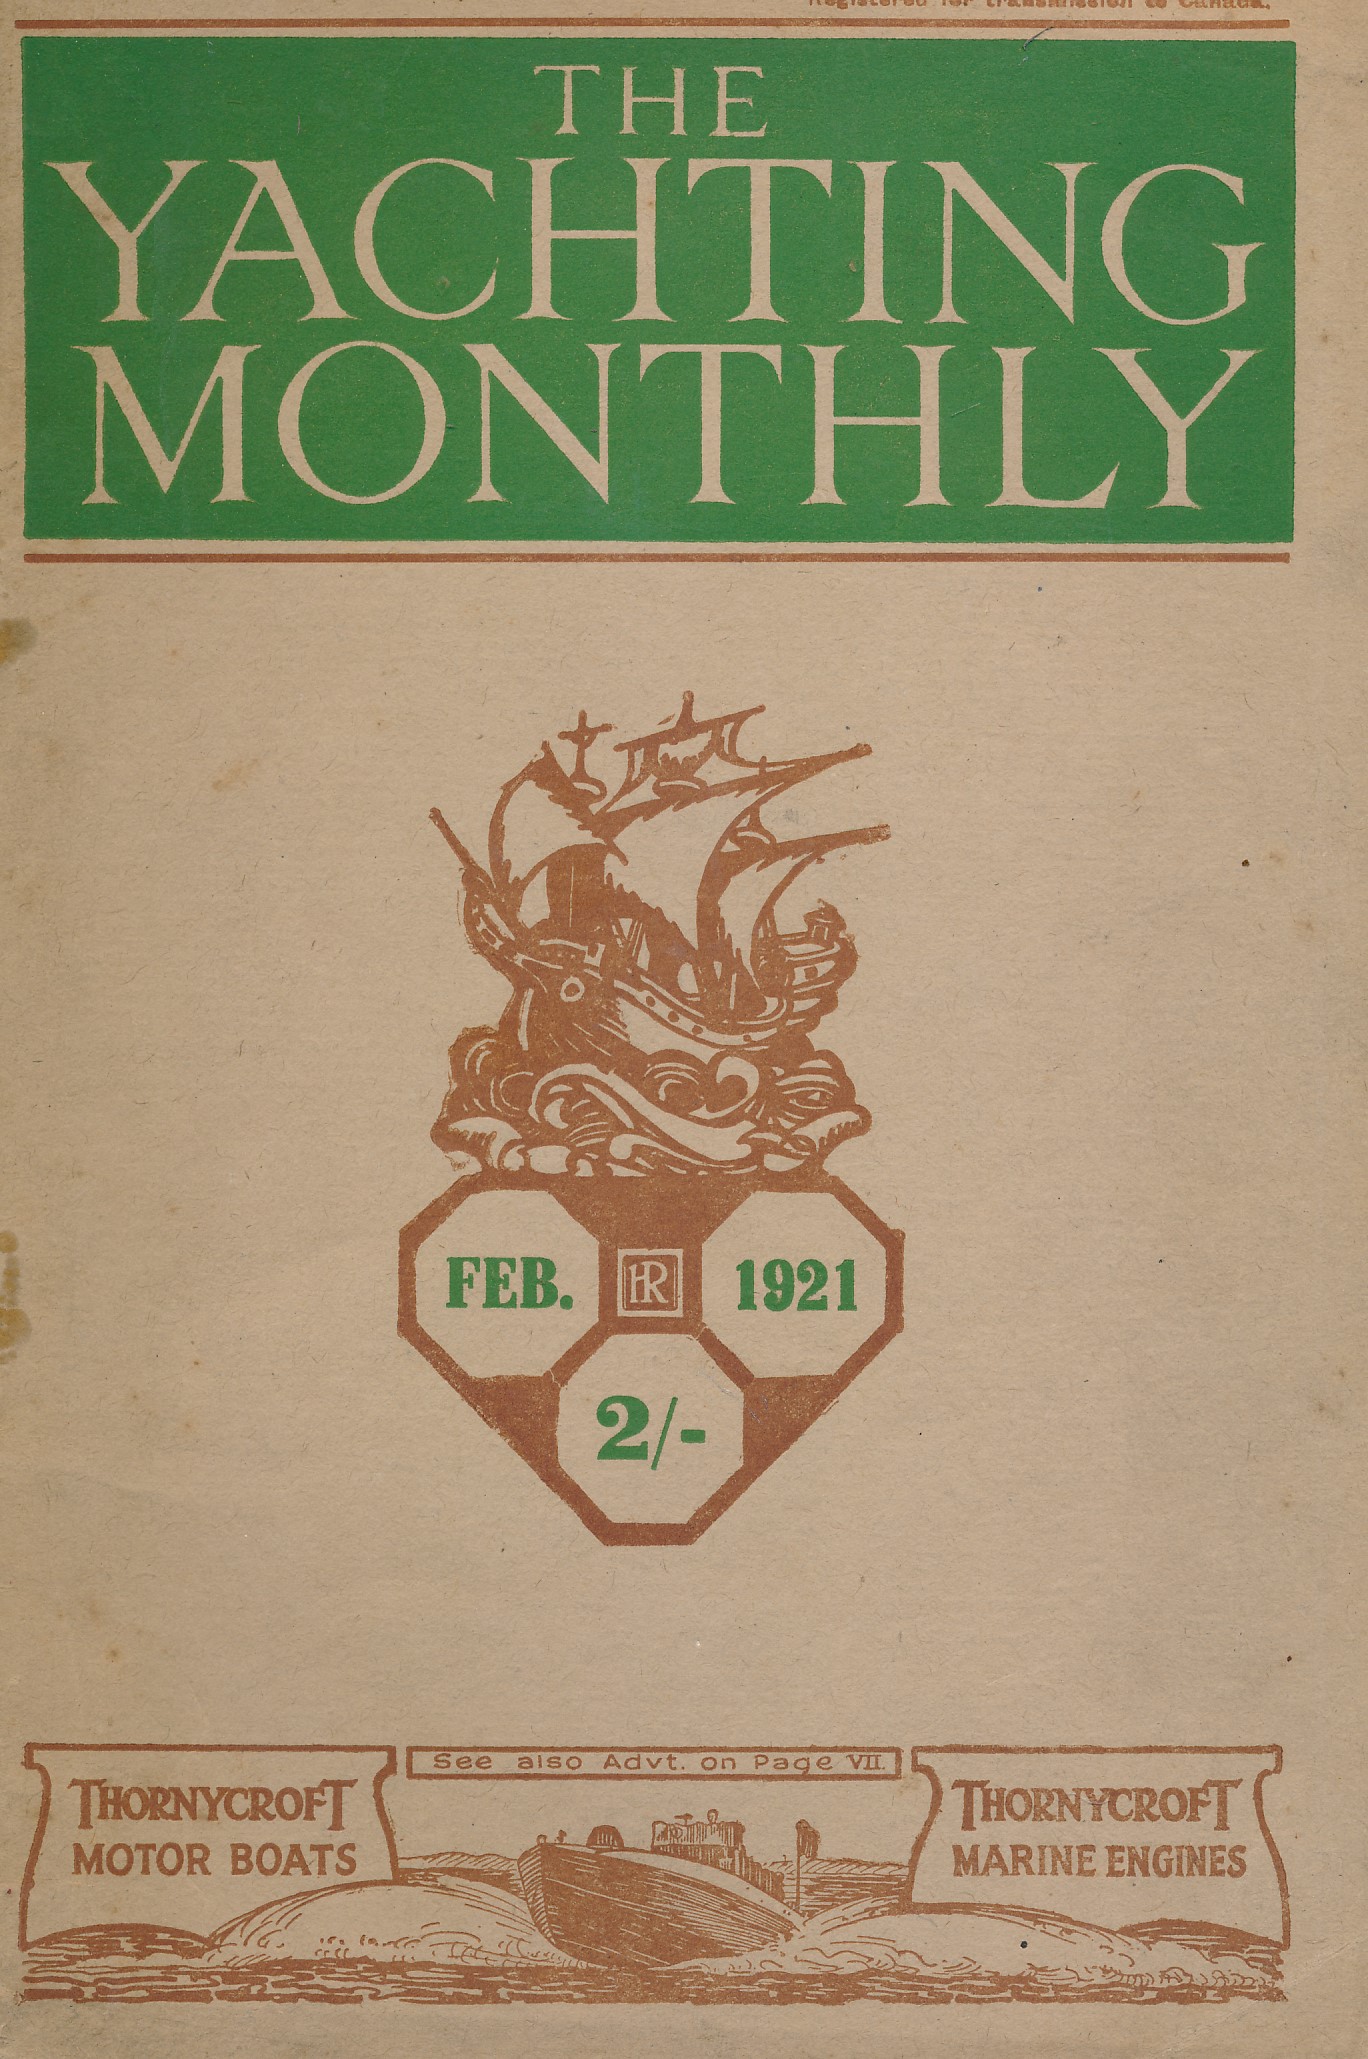 The Yachting Monthly.  Volume 178.- Vol. XXX.  February, 1921.